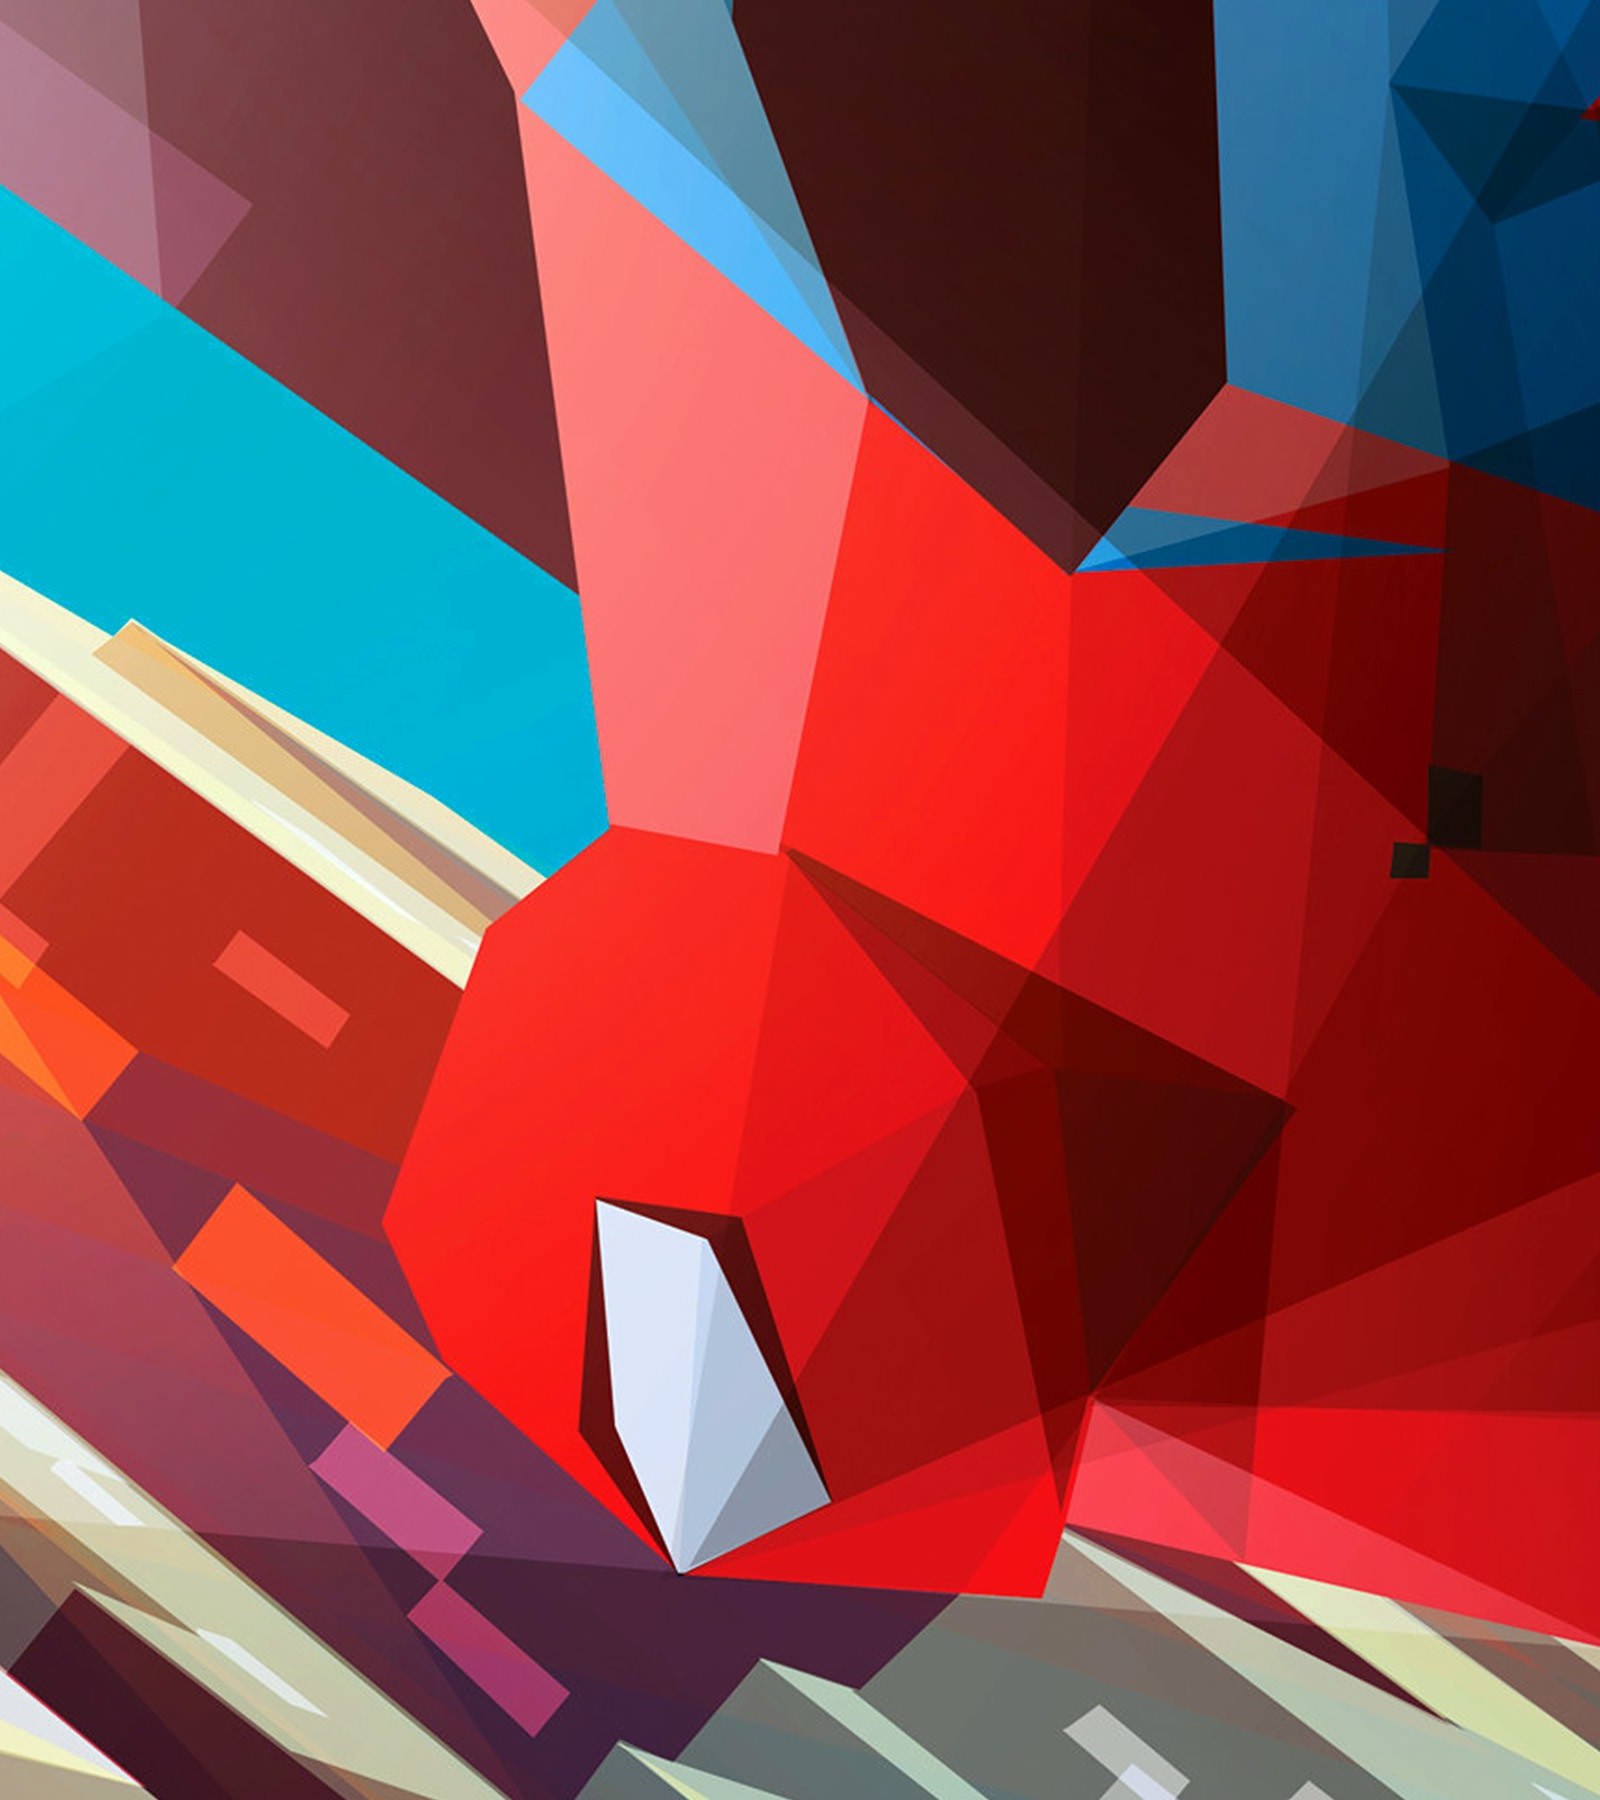 Spiderman Low Poly Illustration Wallpaper for Amazon Kindle Fire HDX 8.9